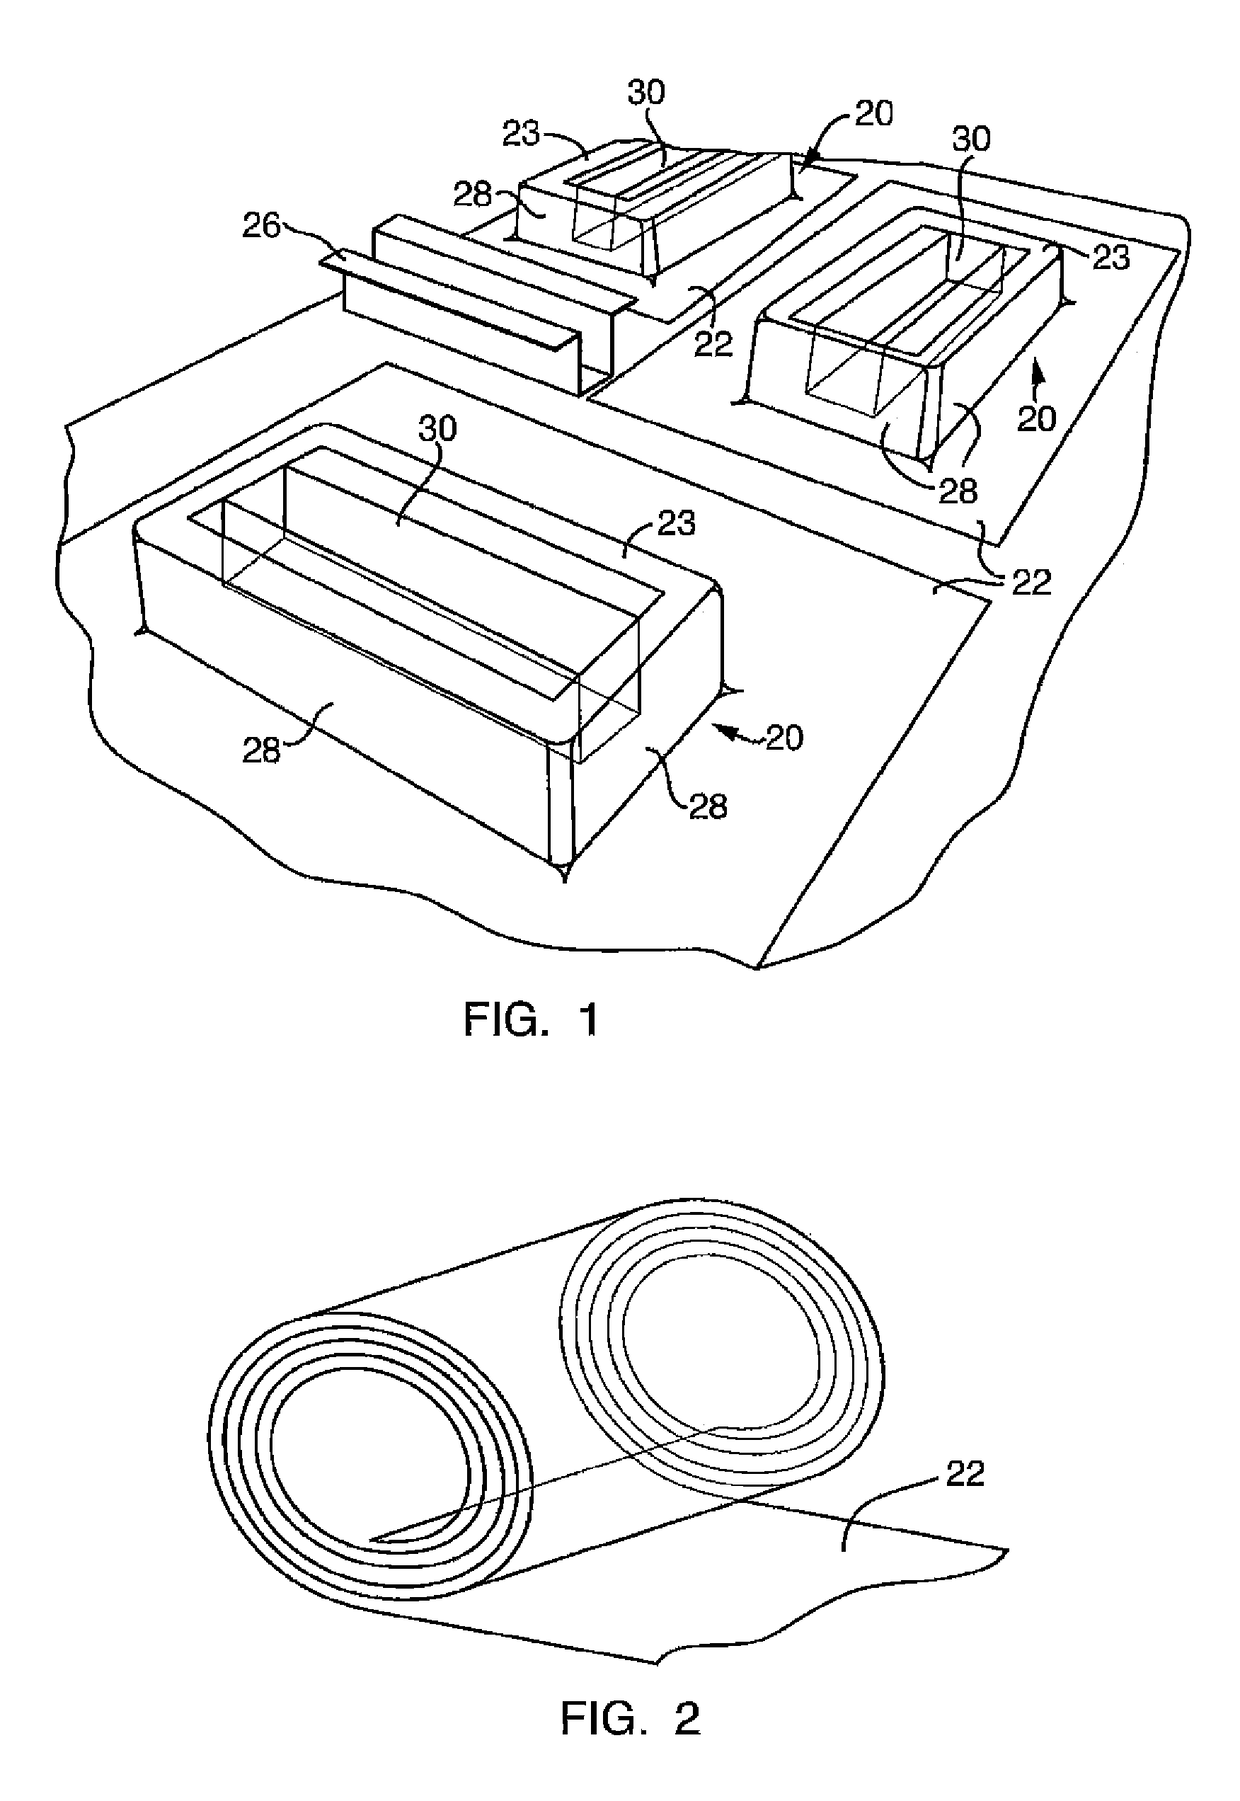 Method of manufacturing a composite insert by molding